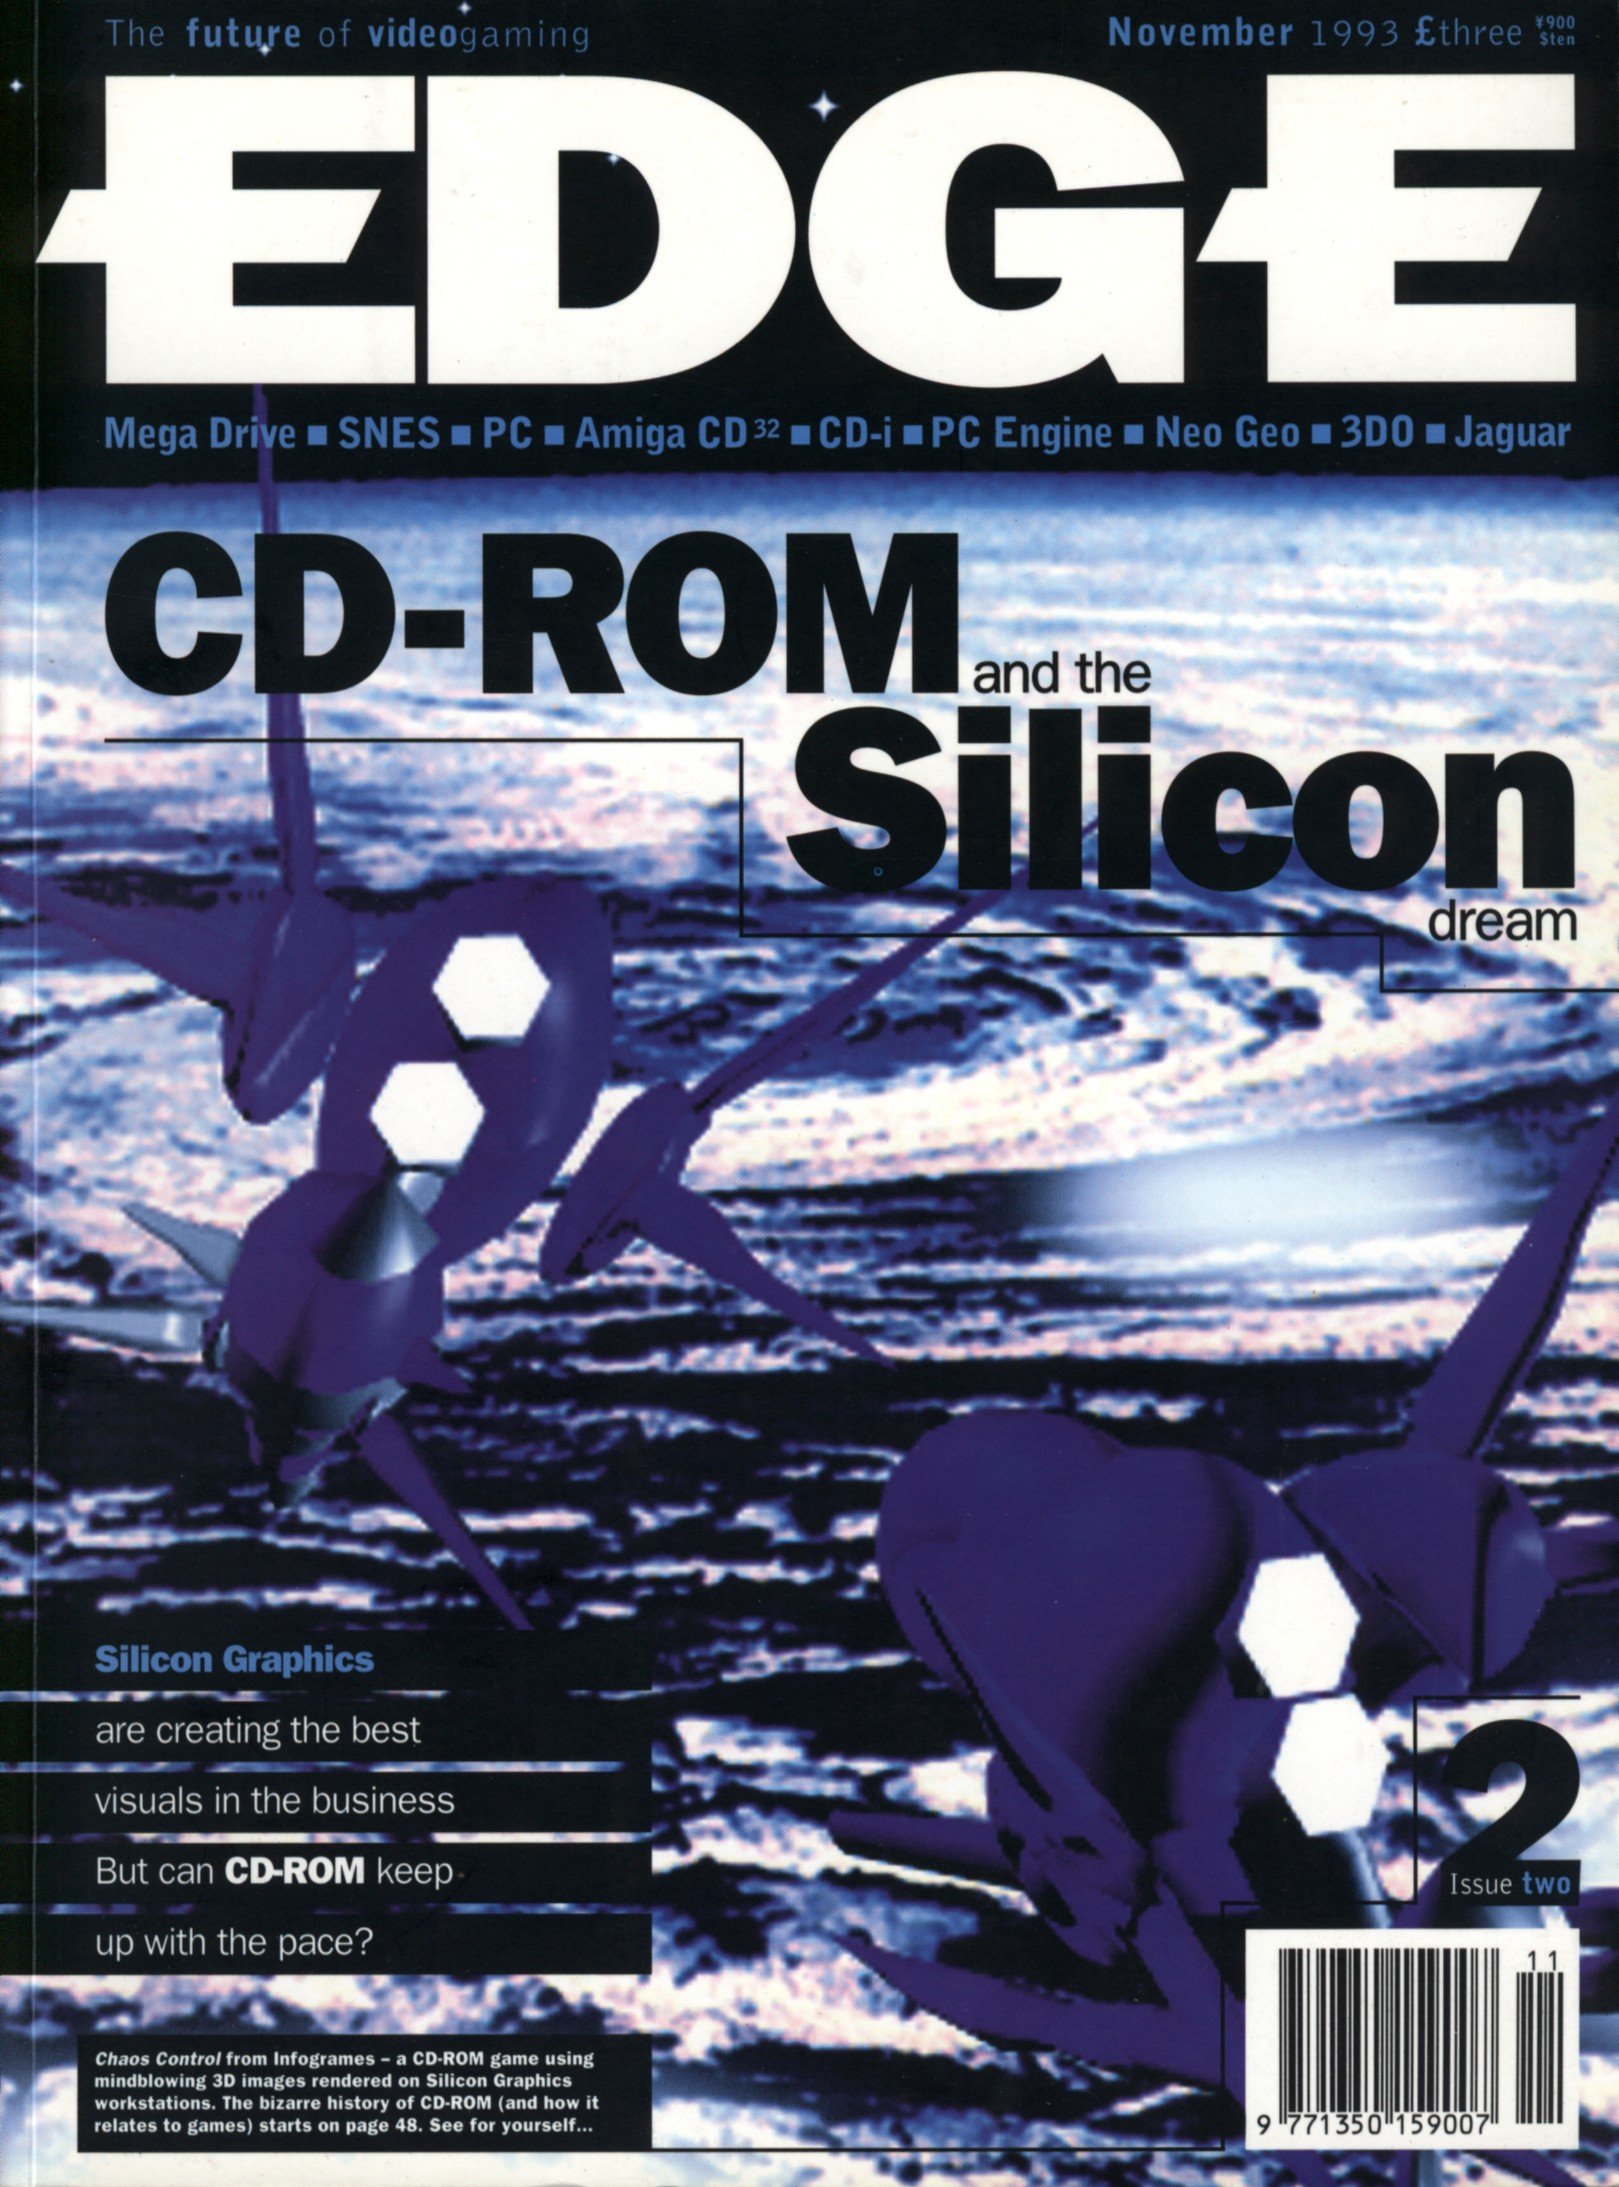 Edge Issue 2 | Magazines from the Past Wiki | Fandom